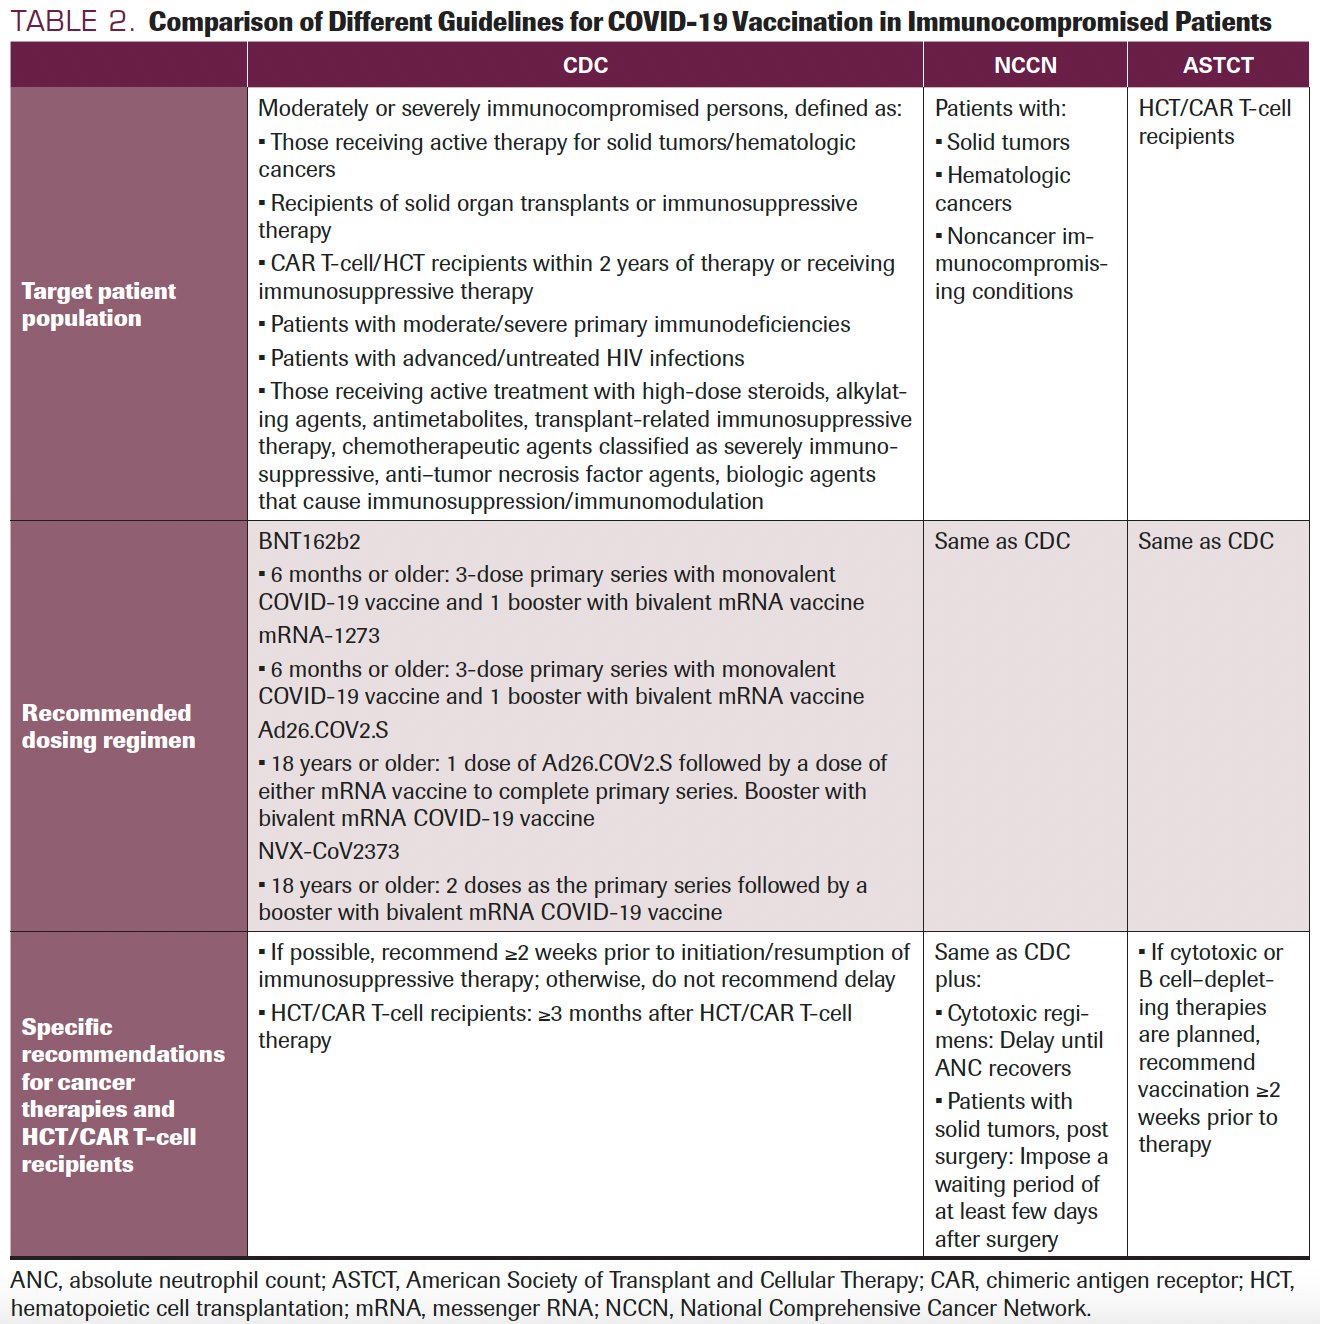 TABLE 2. Comparison of Different Guidelines for COVID-19 Vaccination in Immunocompromised Patients